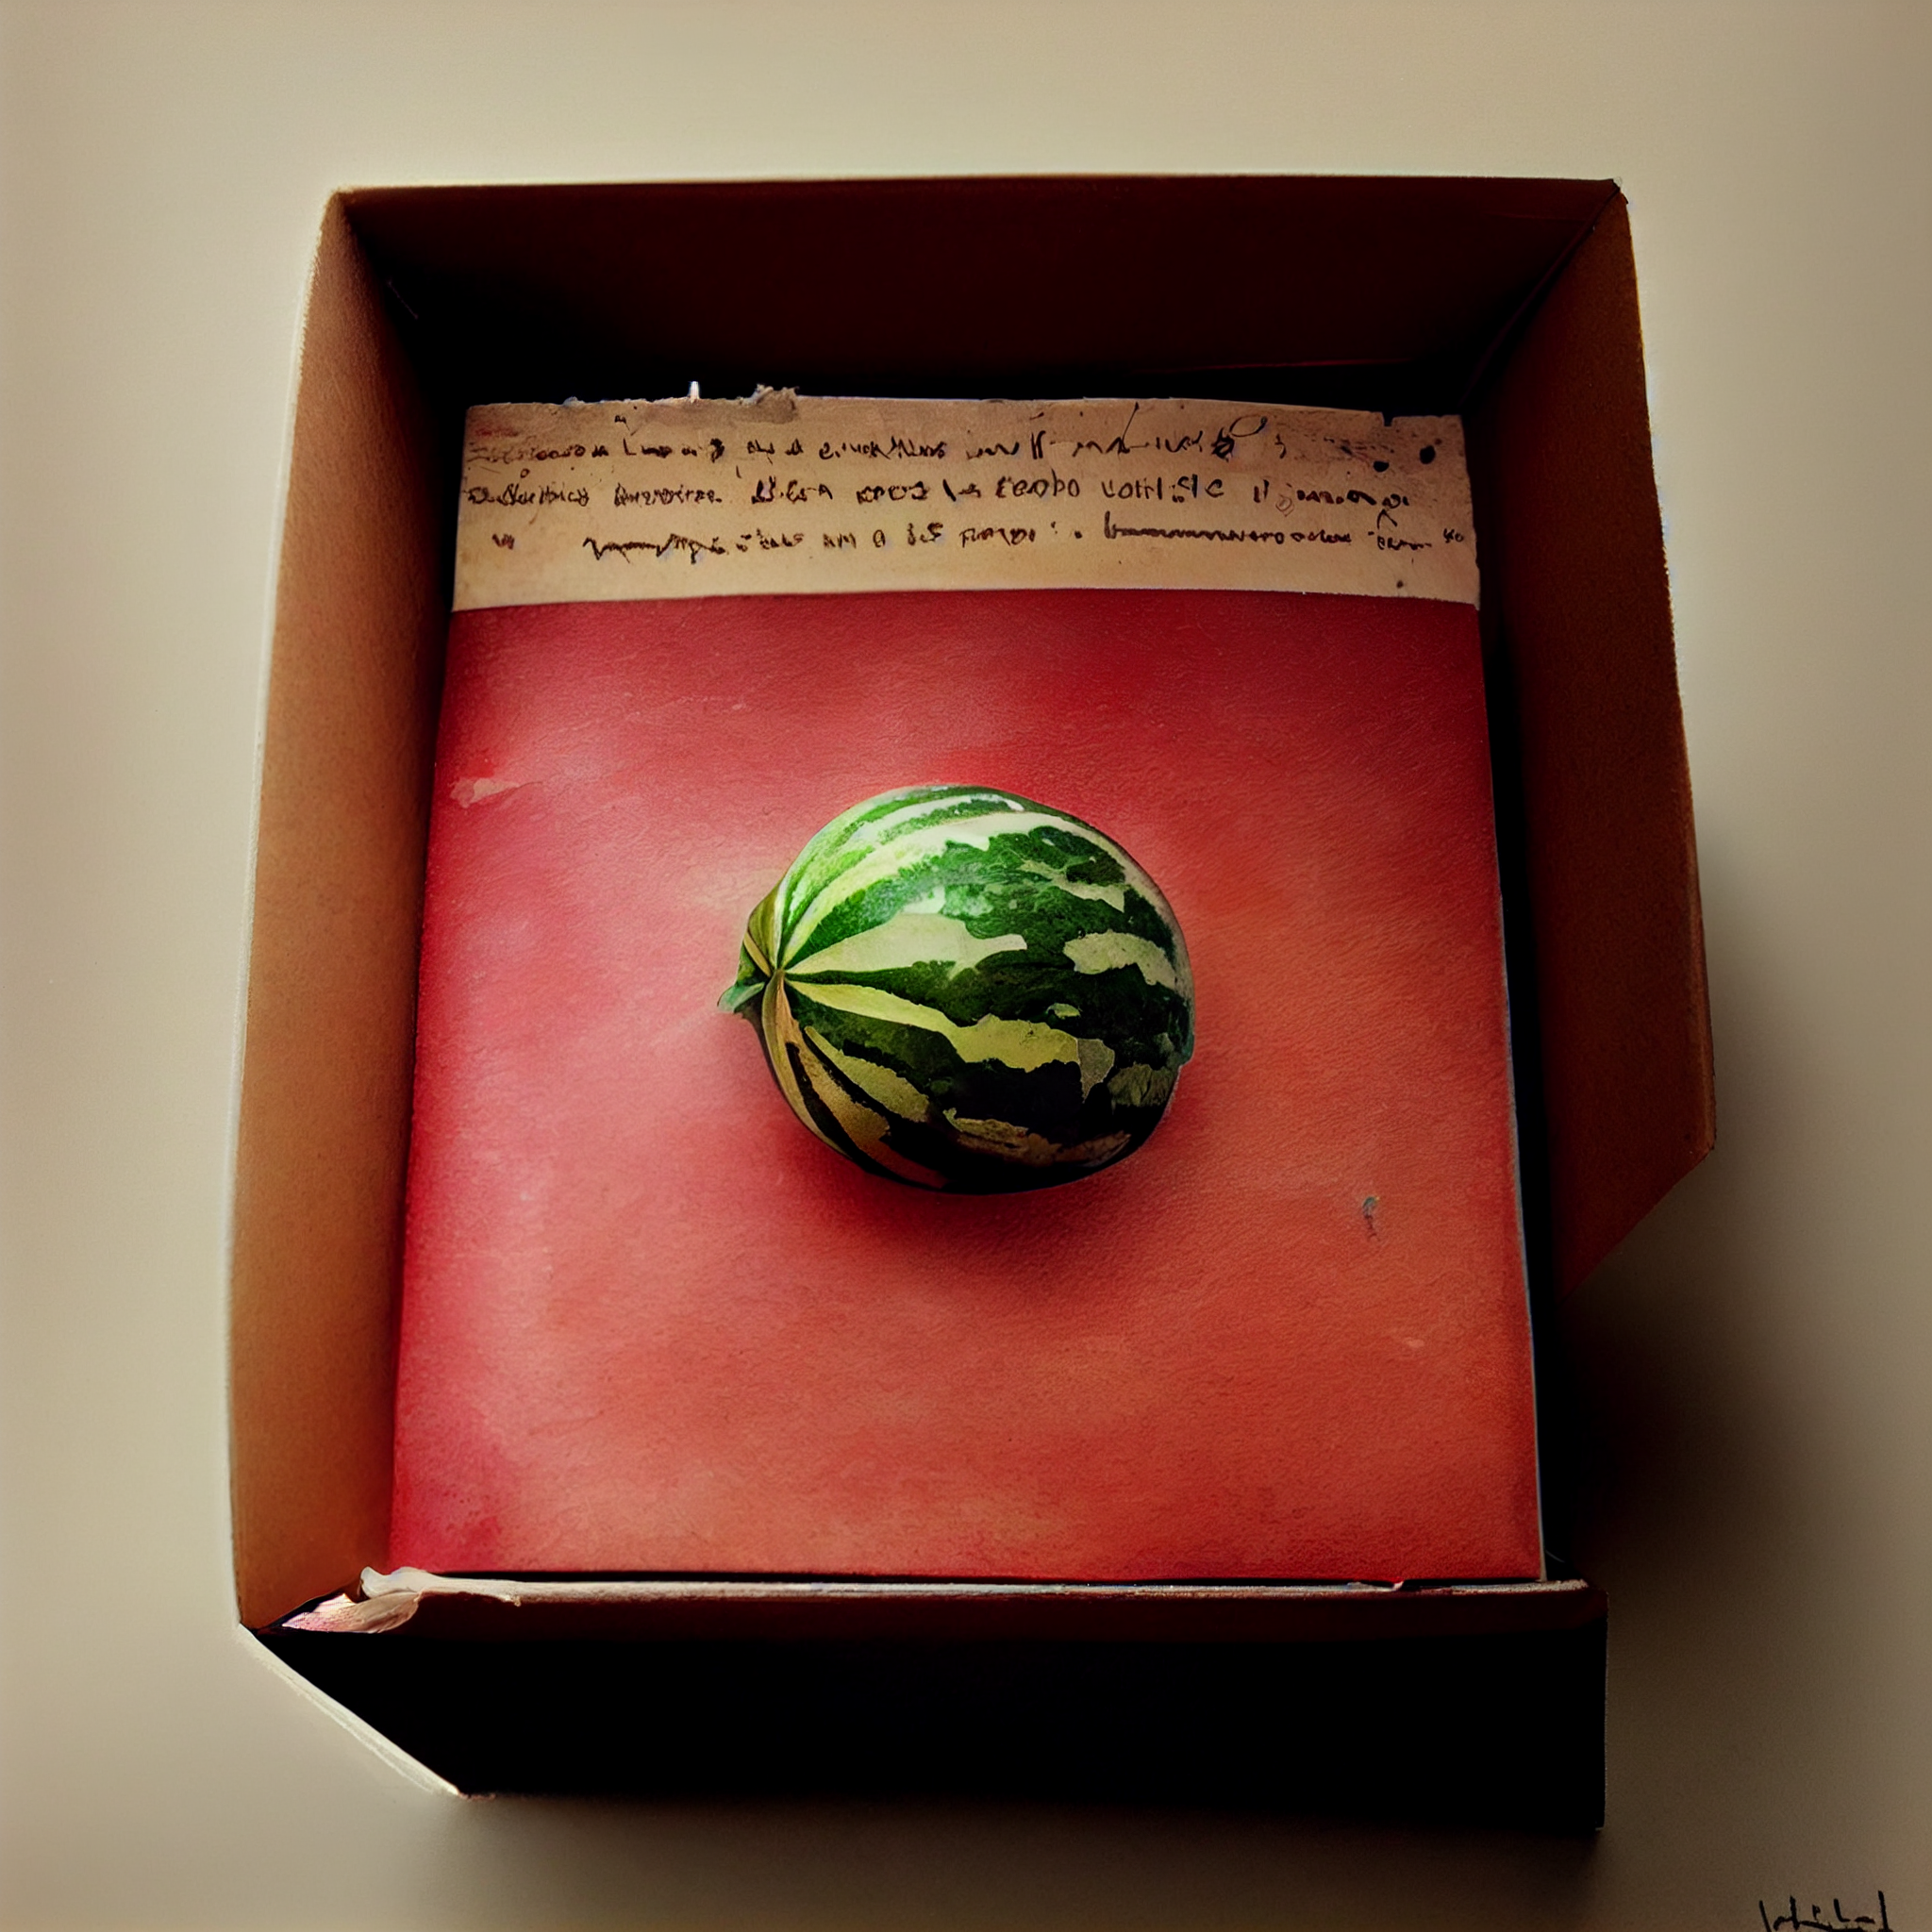 EricdeBroche_a_small_brown_box_with_a_watermelon_and_a_note_ins_fb1a60f6-0147-43b5-a03a-1c6c757ba27e.png